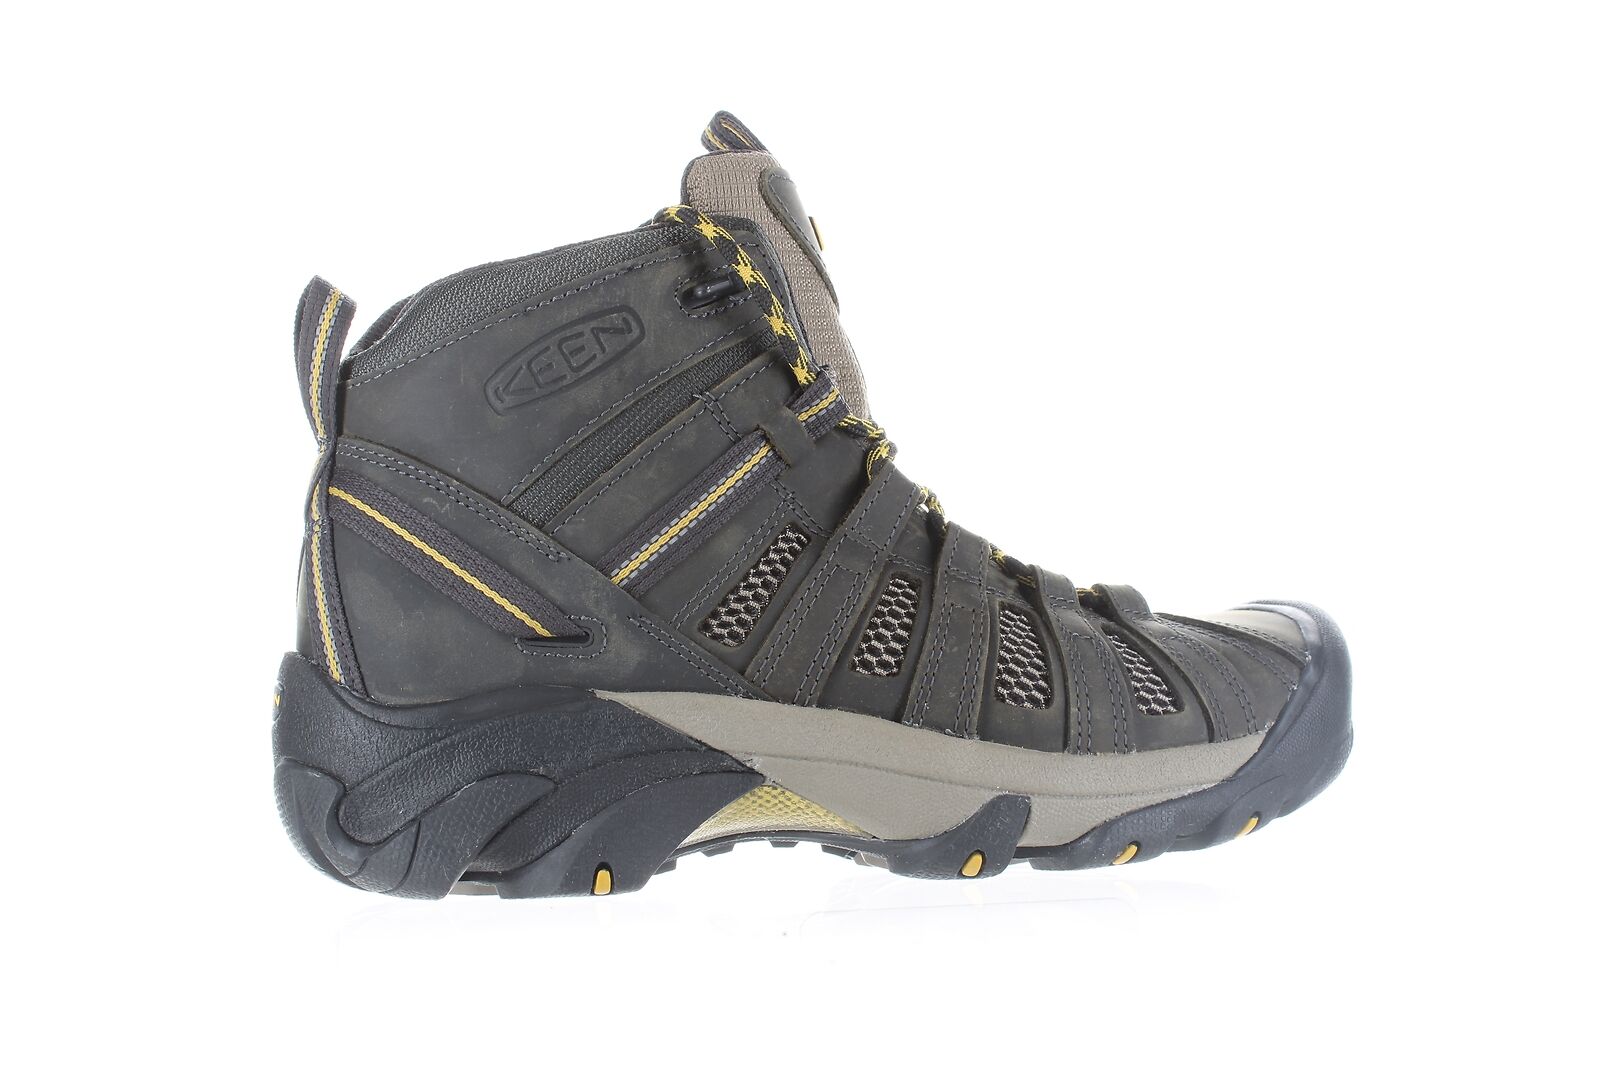 KEEN Mens Voyageur Mid Raven/Tawny Olive Hiking Boots Size 9 (2284279)